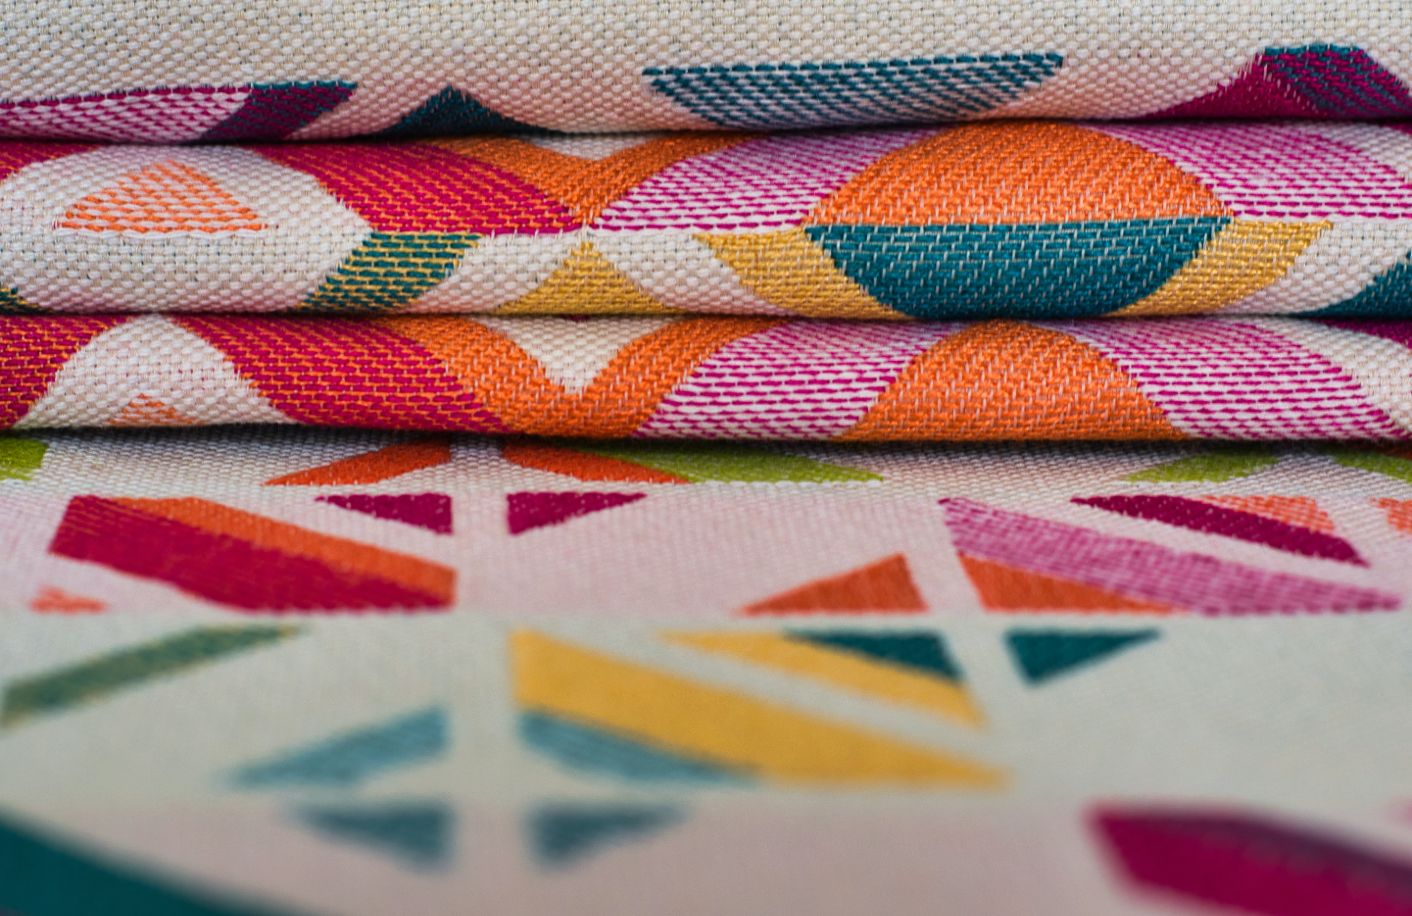 folded-up-textiles-colorful